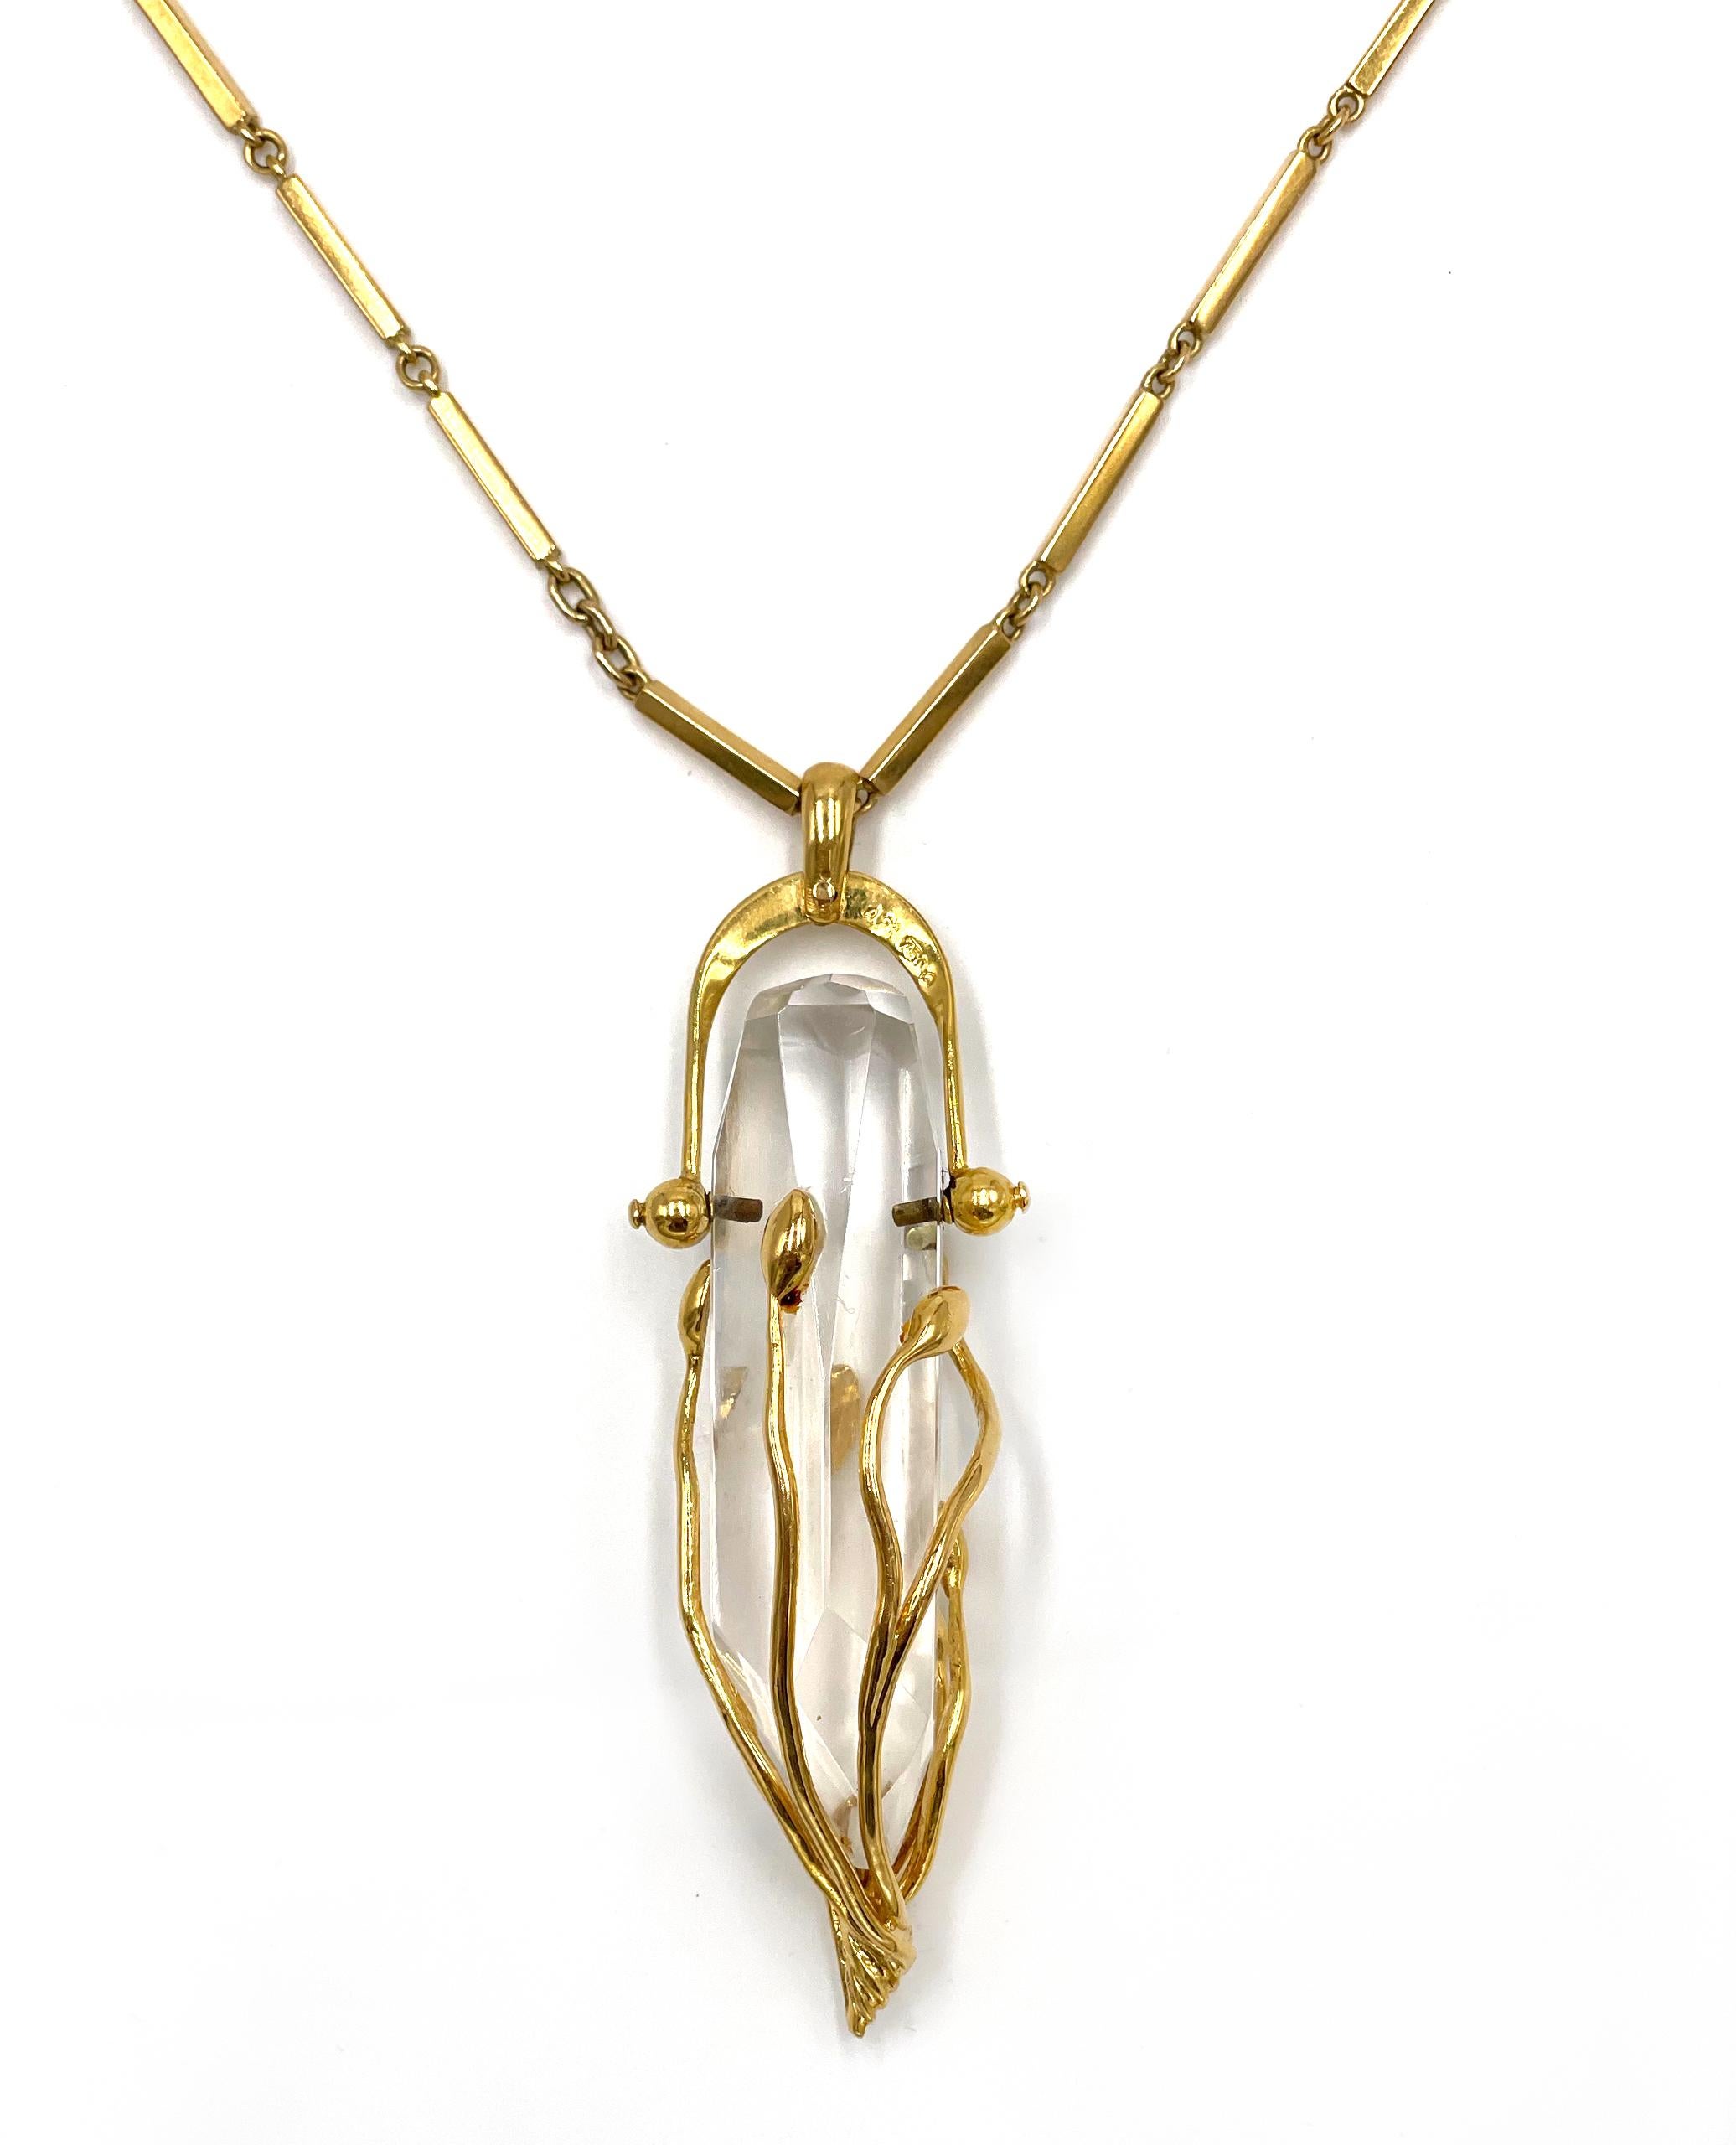 Hand Crafted 18K Yellow Gold and Quartz Crystal Drop Necklace In Good Condition For Sale In Old Tappan, NJ